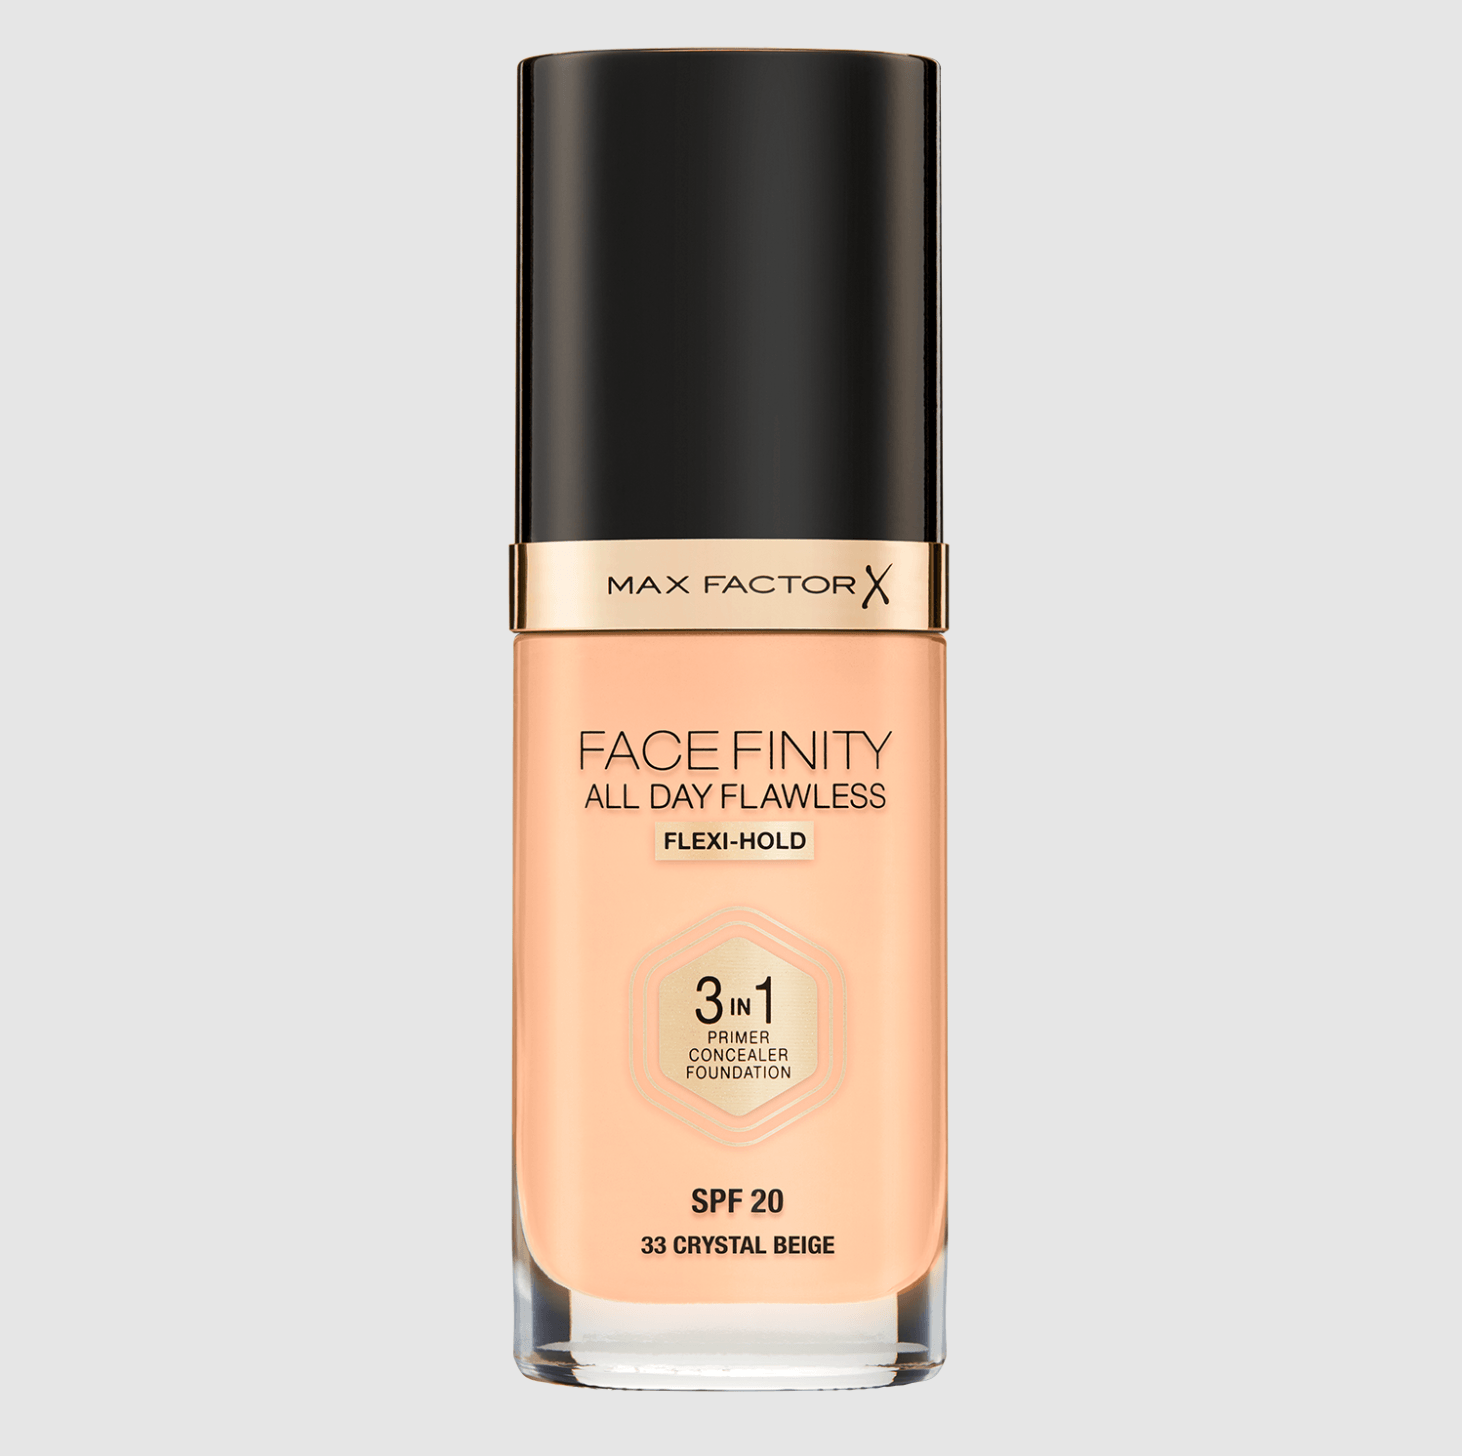 Max Factor Facefinity All Day Flawless 3 In 1 Foundation 33 - Crystal Beige (Non-carded) - www.indiancart.com.au - Foundations & Concealers - Max Factor - Max Factor